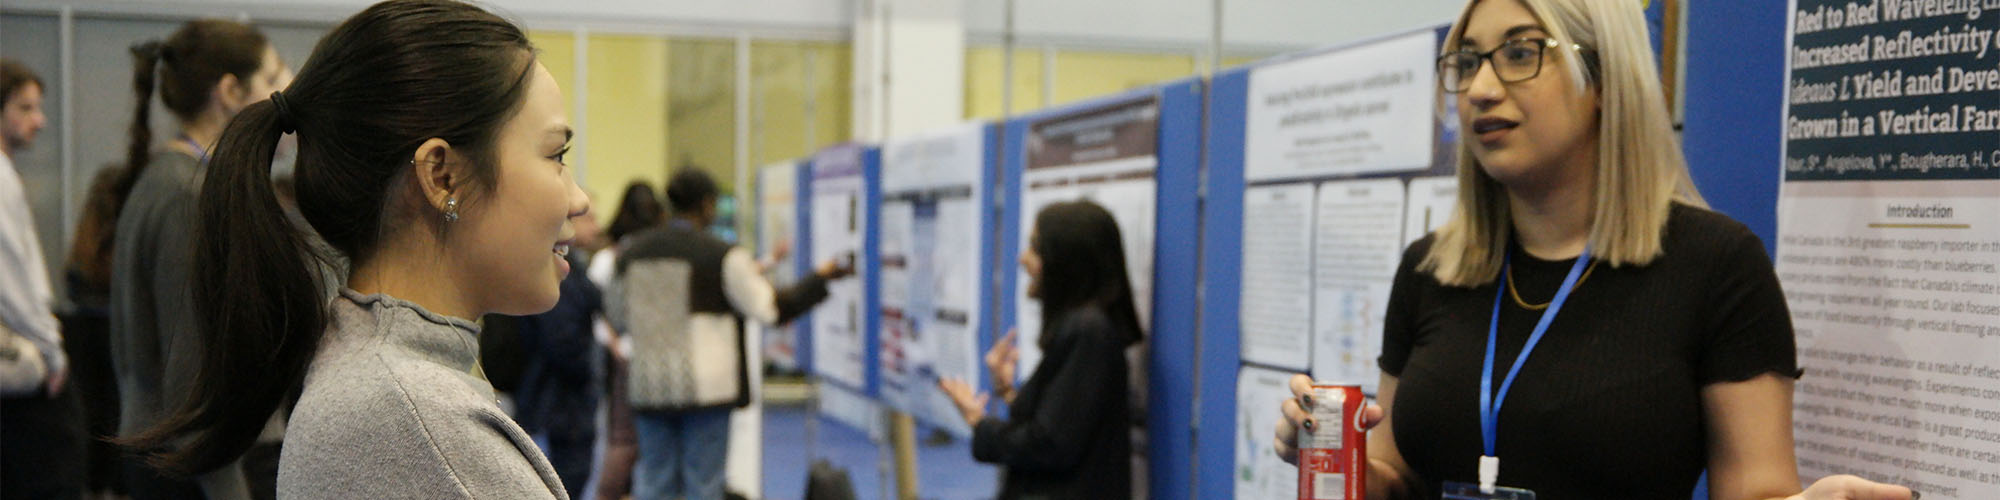 Undergraduate student presenting research at poster session at Ontario Biology Day